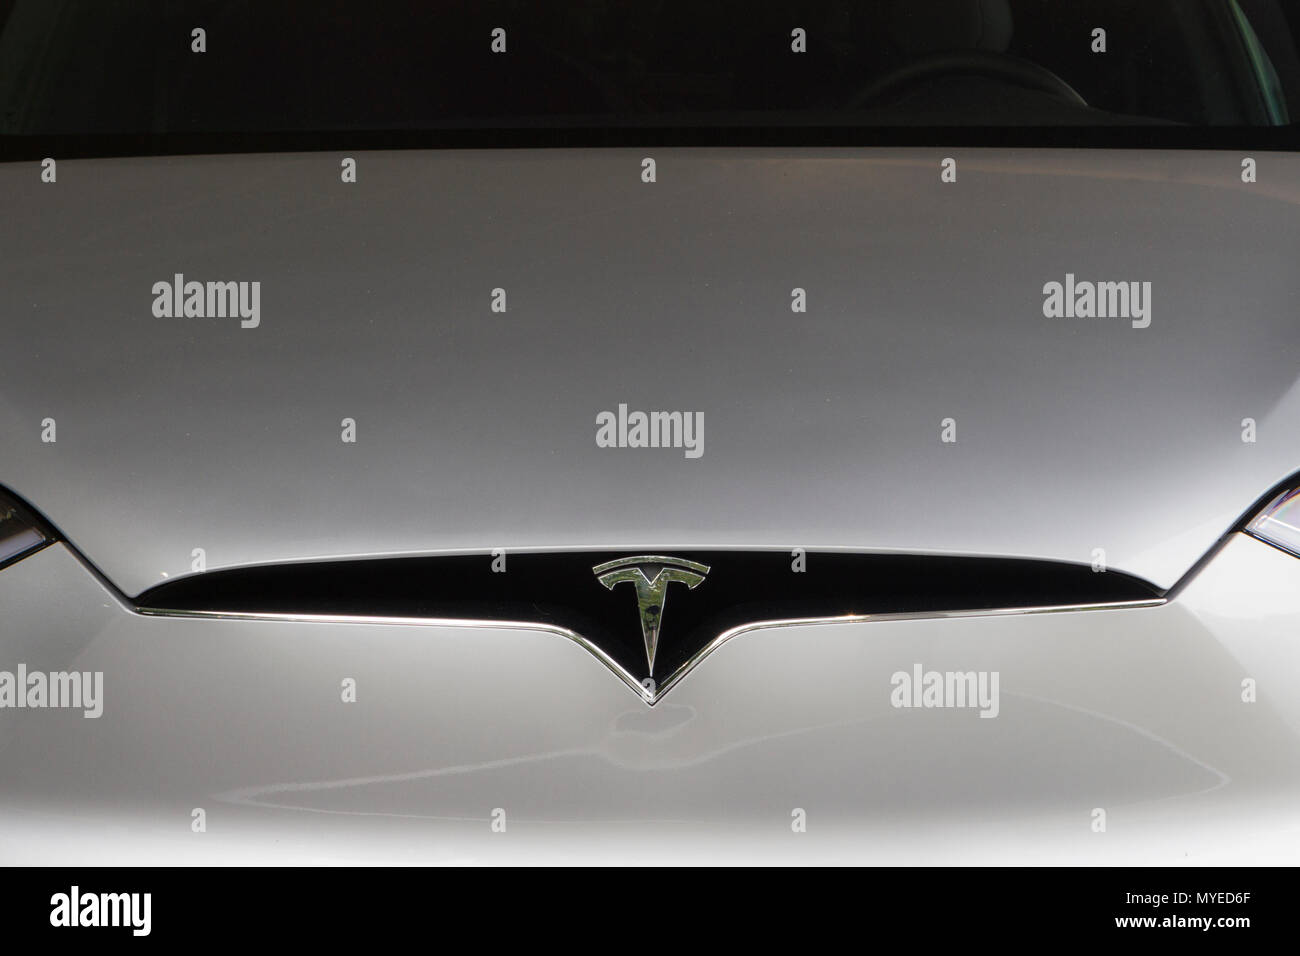 Torino, Italy. 7th June 2018. Tesla logo on a Model X. 2018 edition of Parco Valentino car show hosts cars by many automobile manufacturers and car designers in Valentino Park in Torino, Italy Credit: Marco Destefanis/Alamy Live News Stock Photo